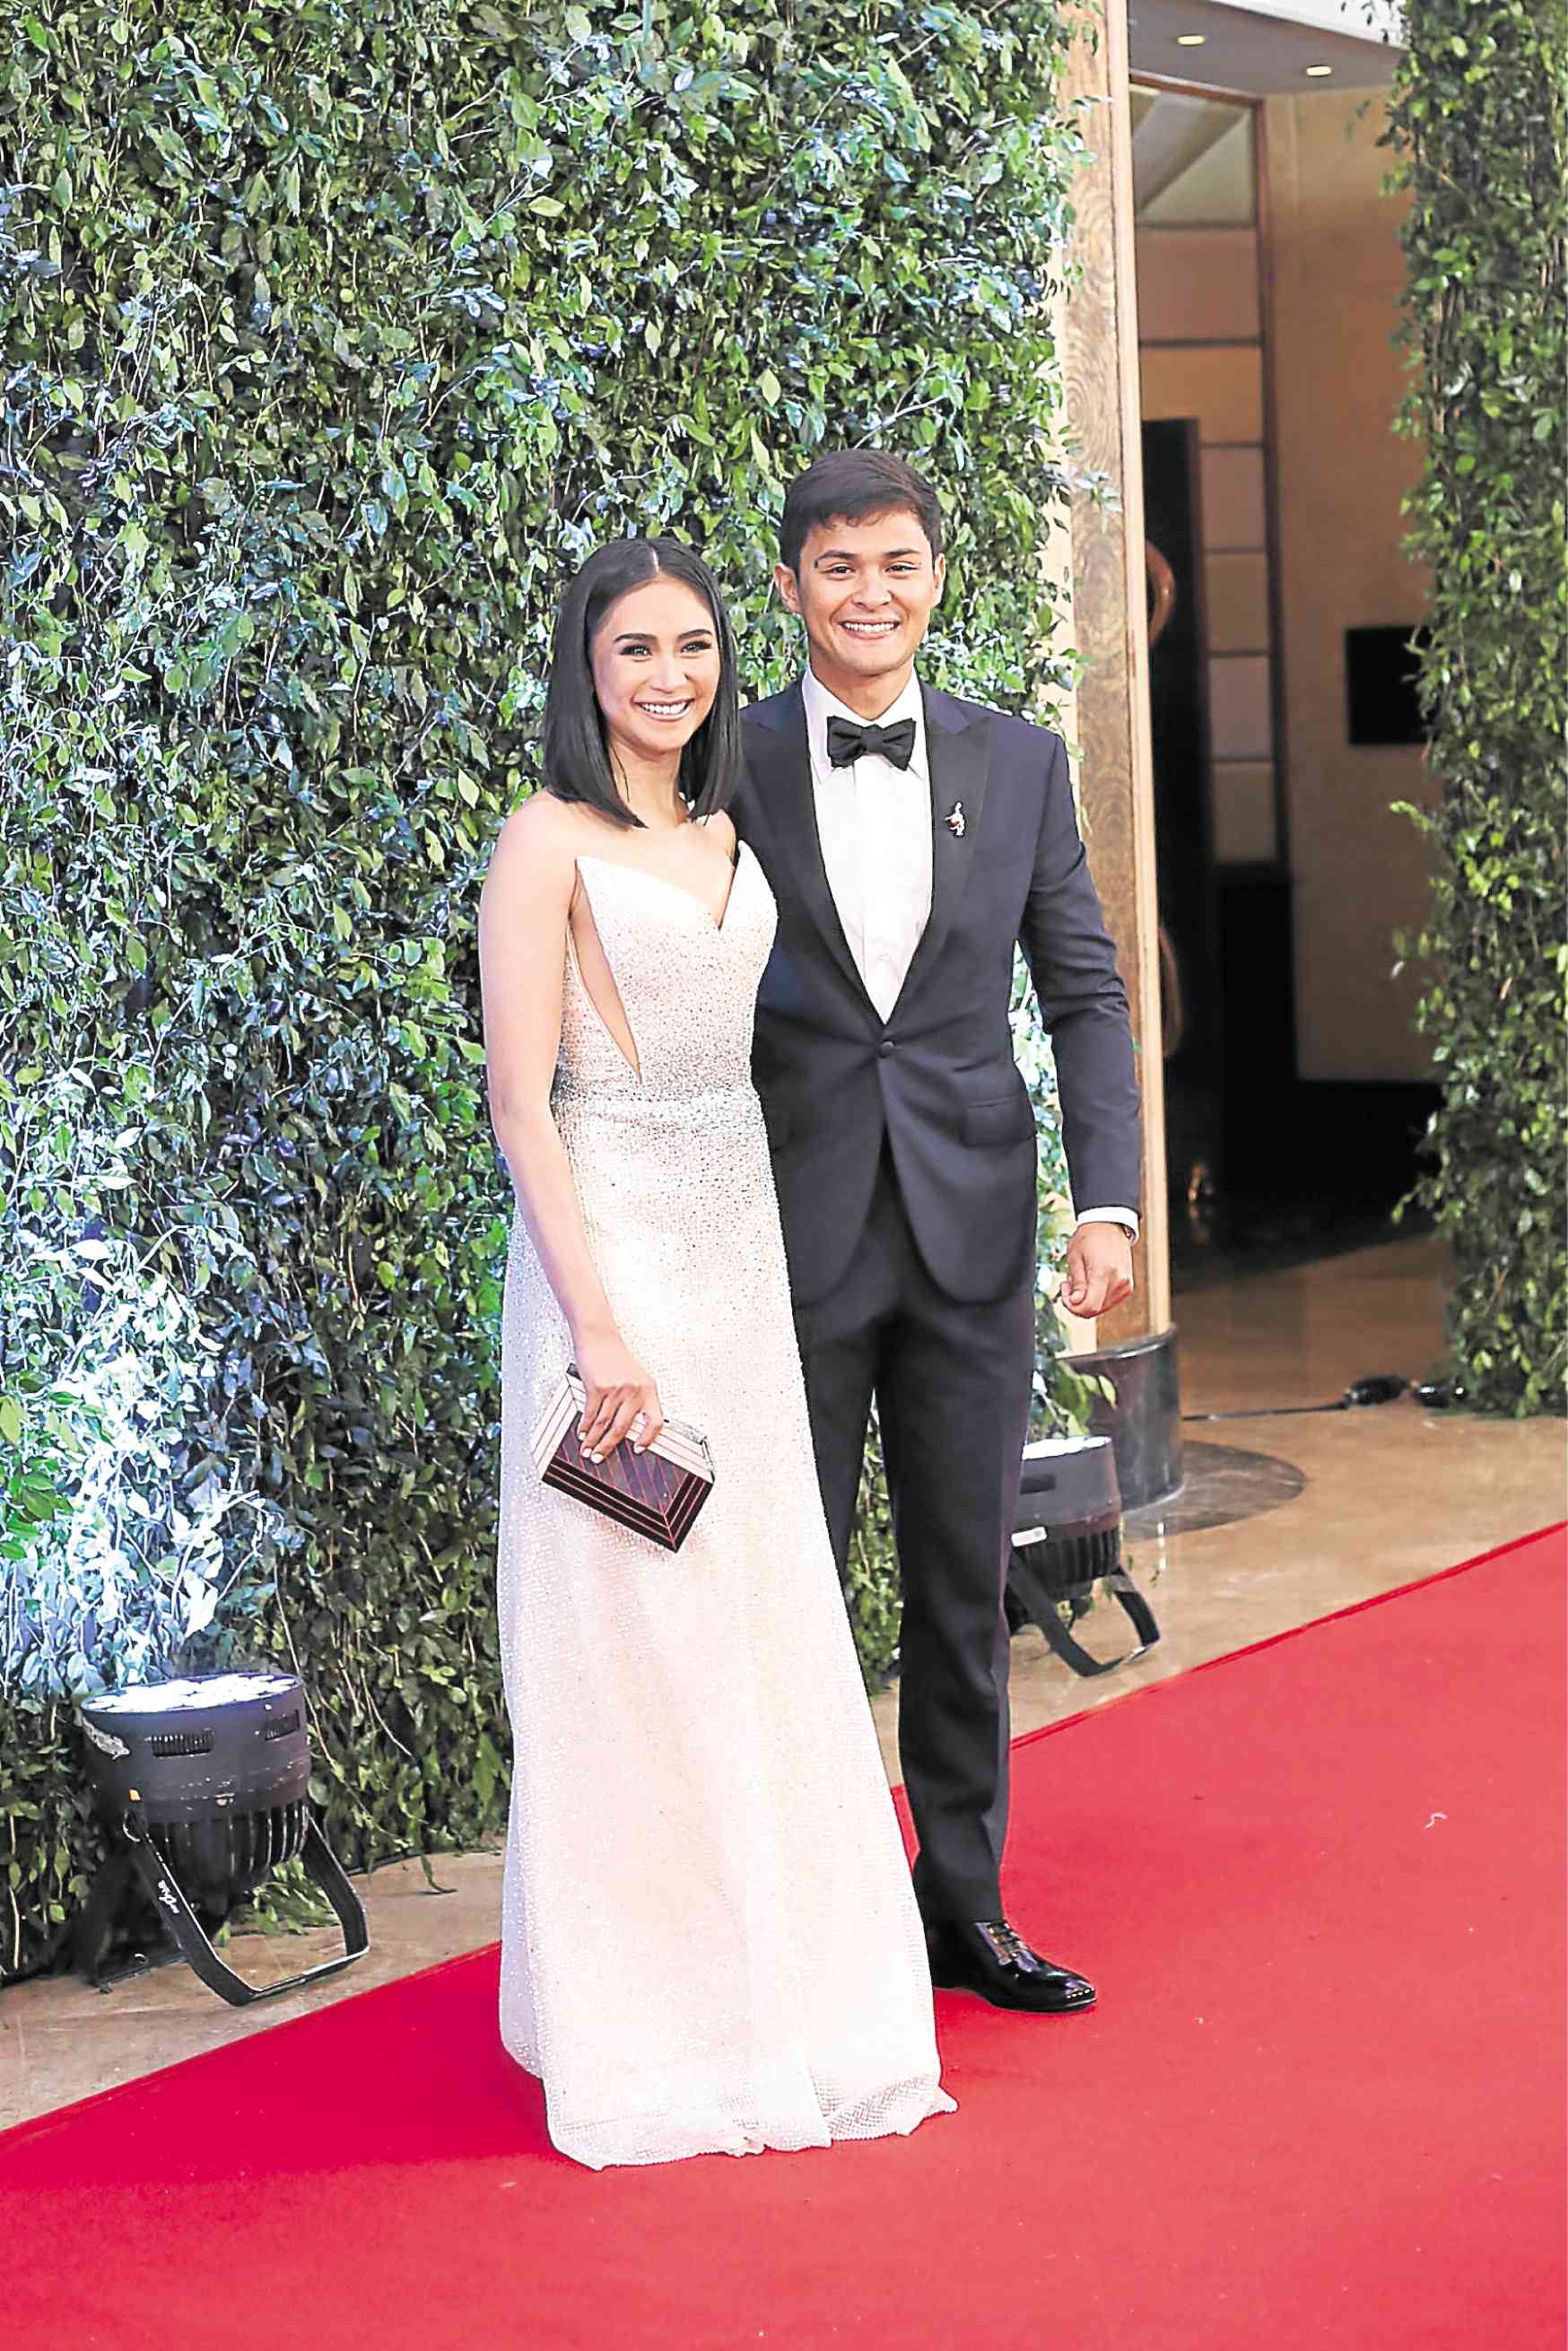 Sarah Geronimo and Matteo Guidicelli | Inquirer Entertainment